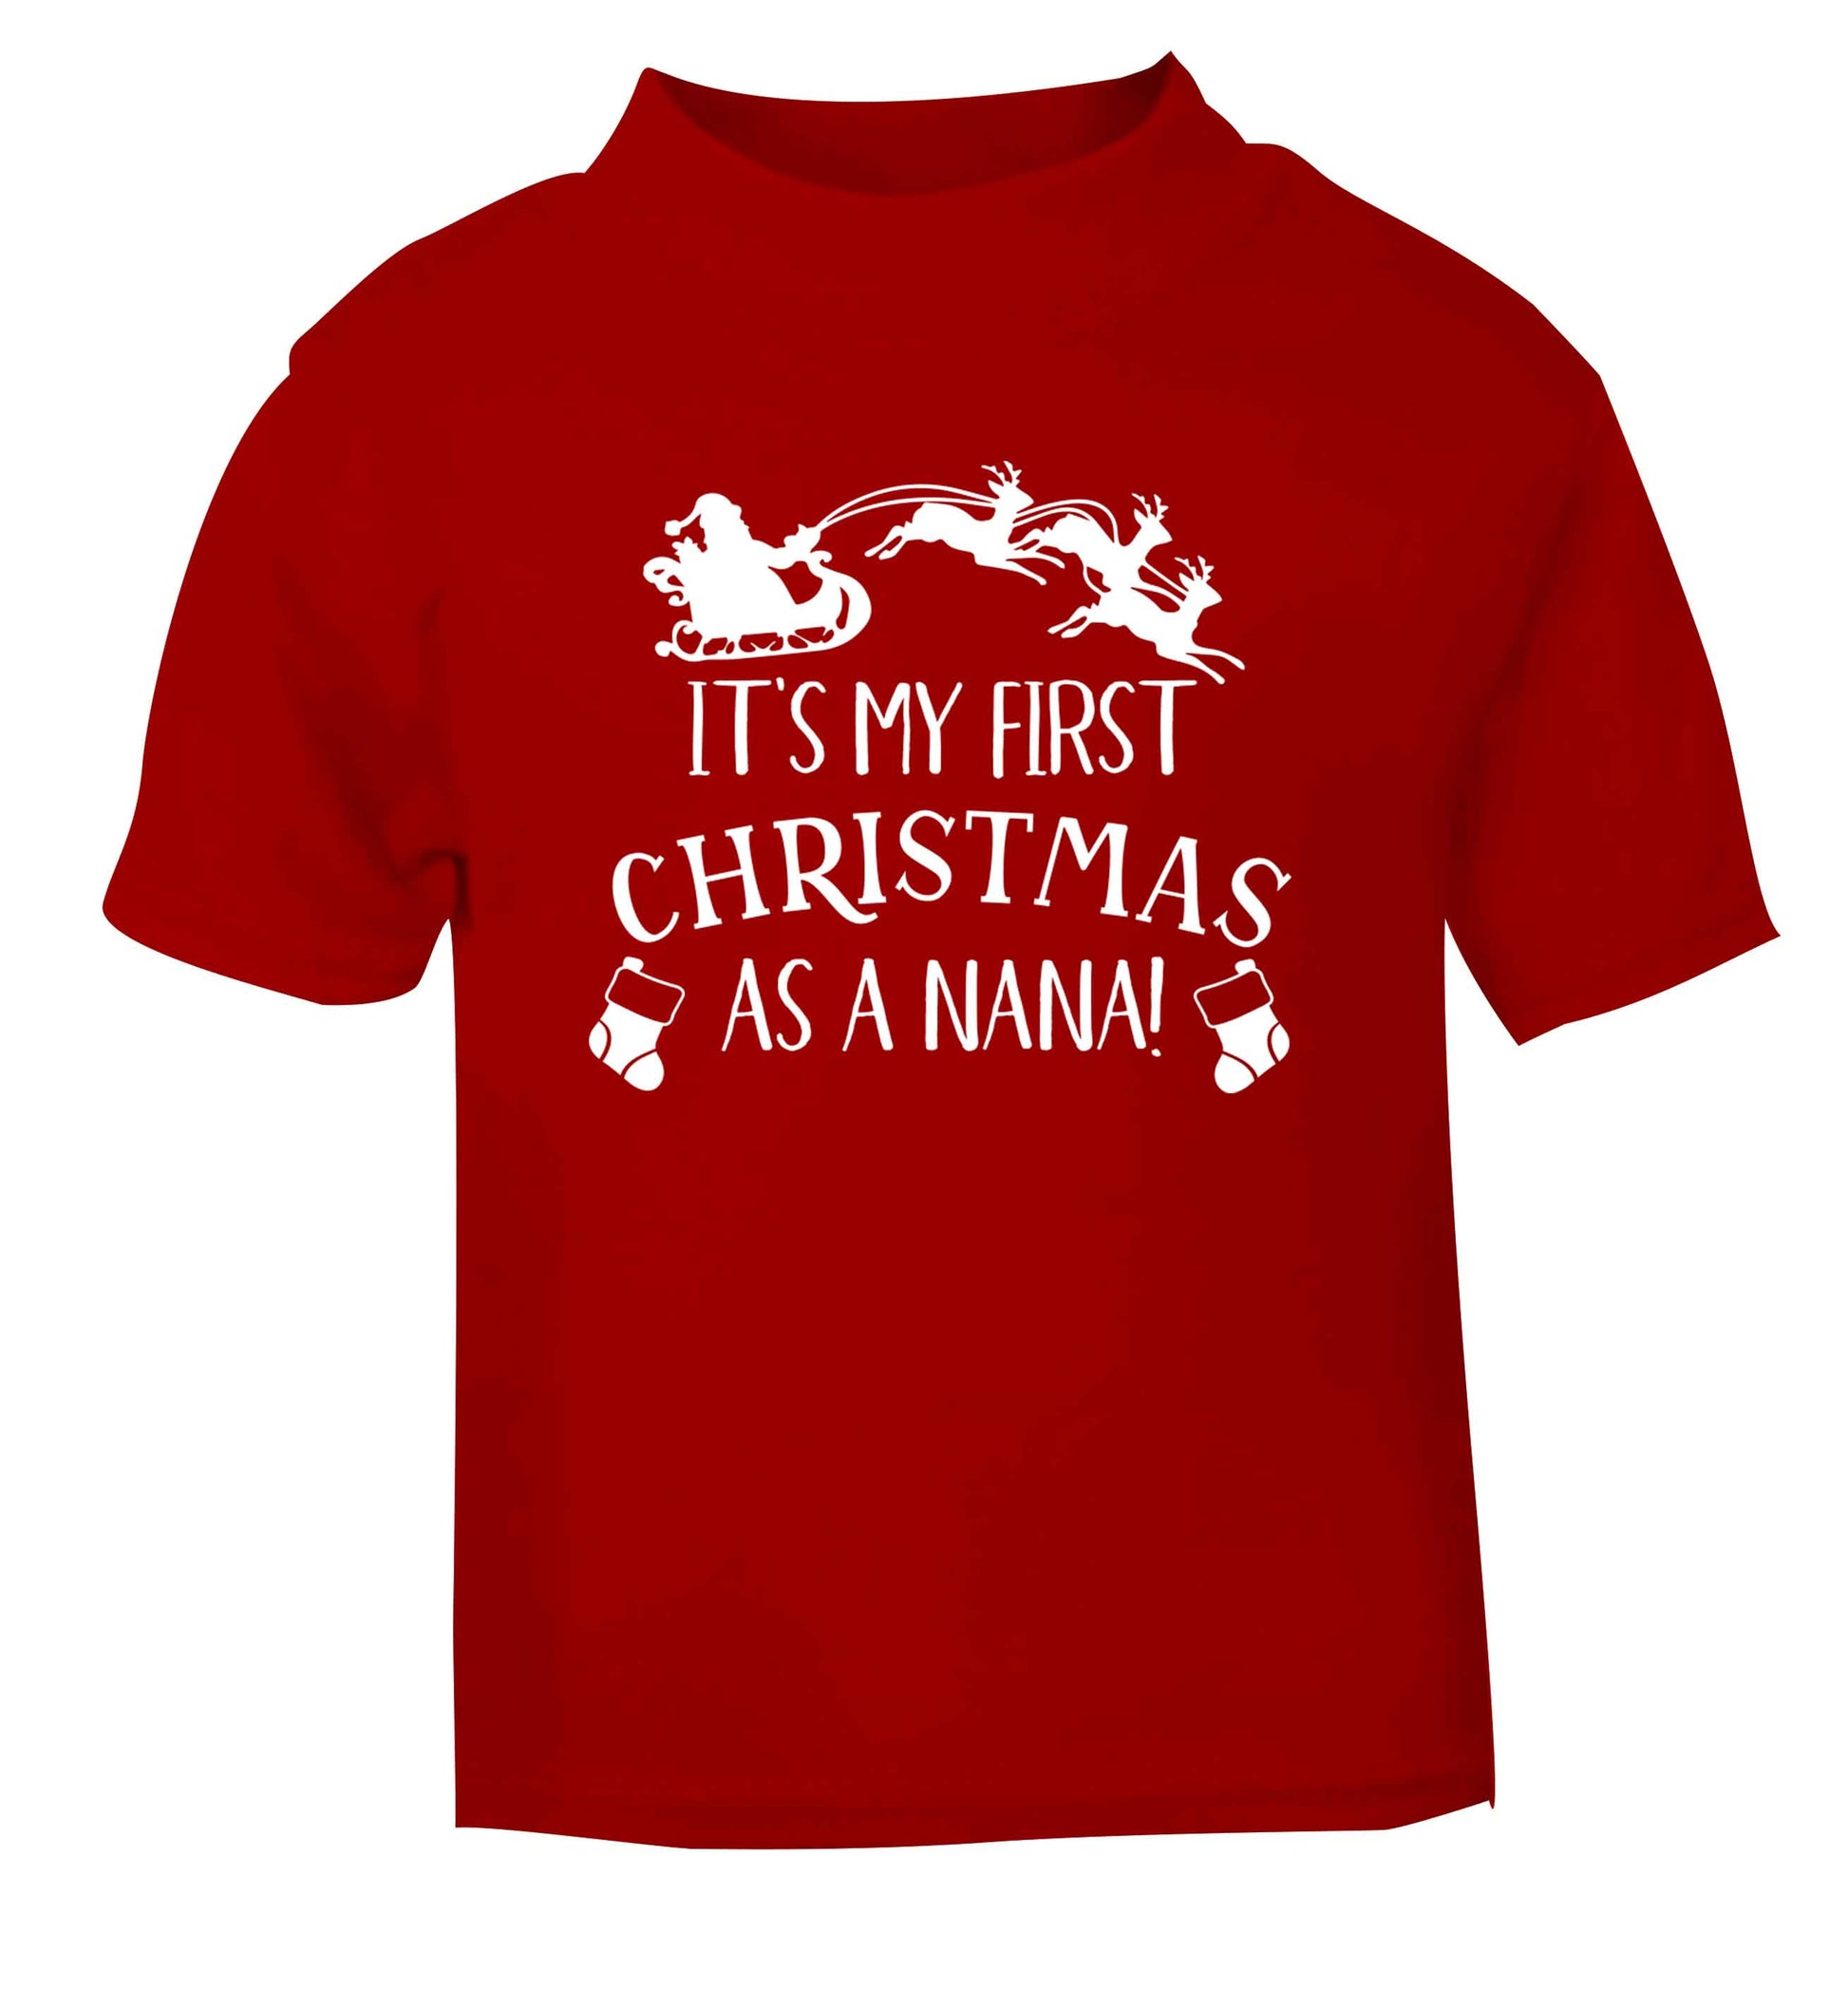 It's my first Christmas as a nana red Baby Toddler Tshirt 2 Years